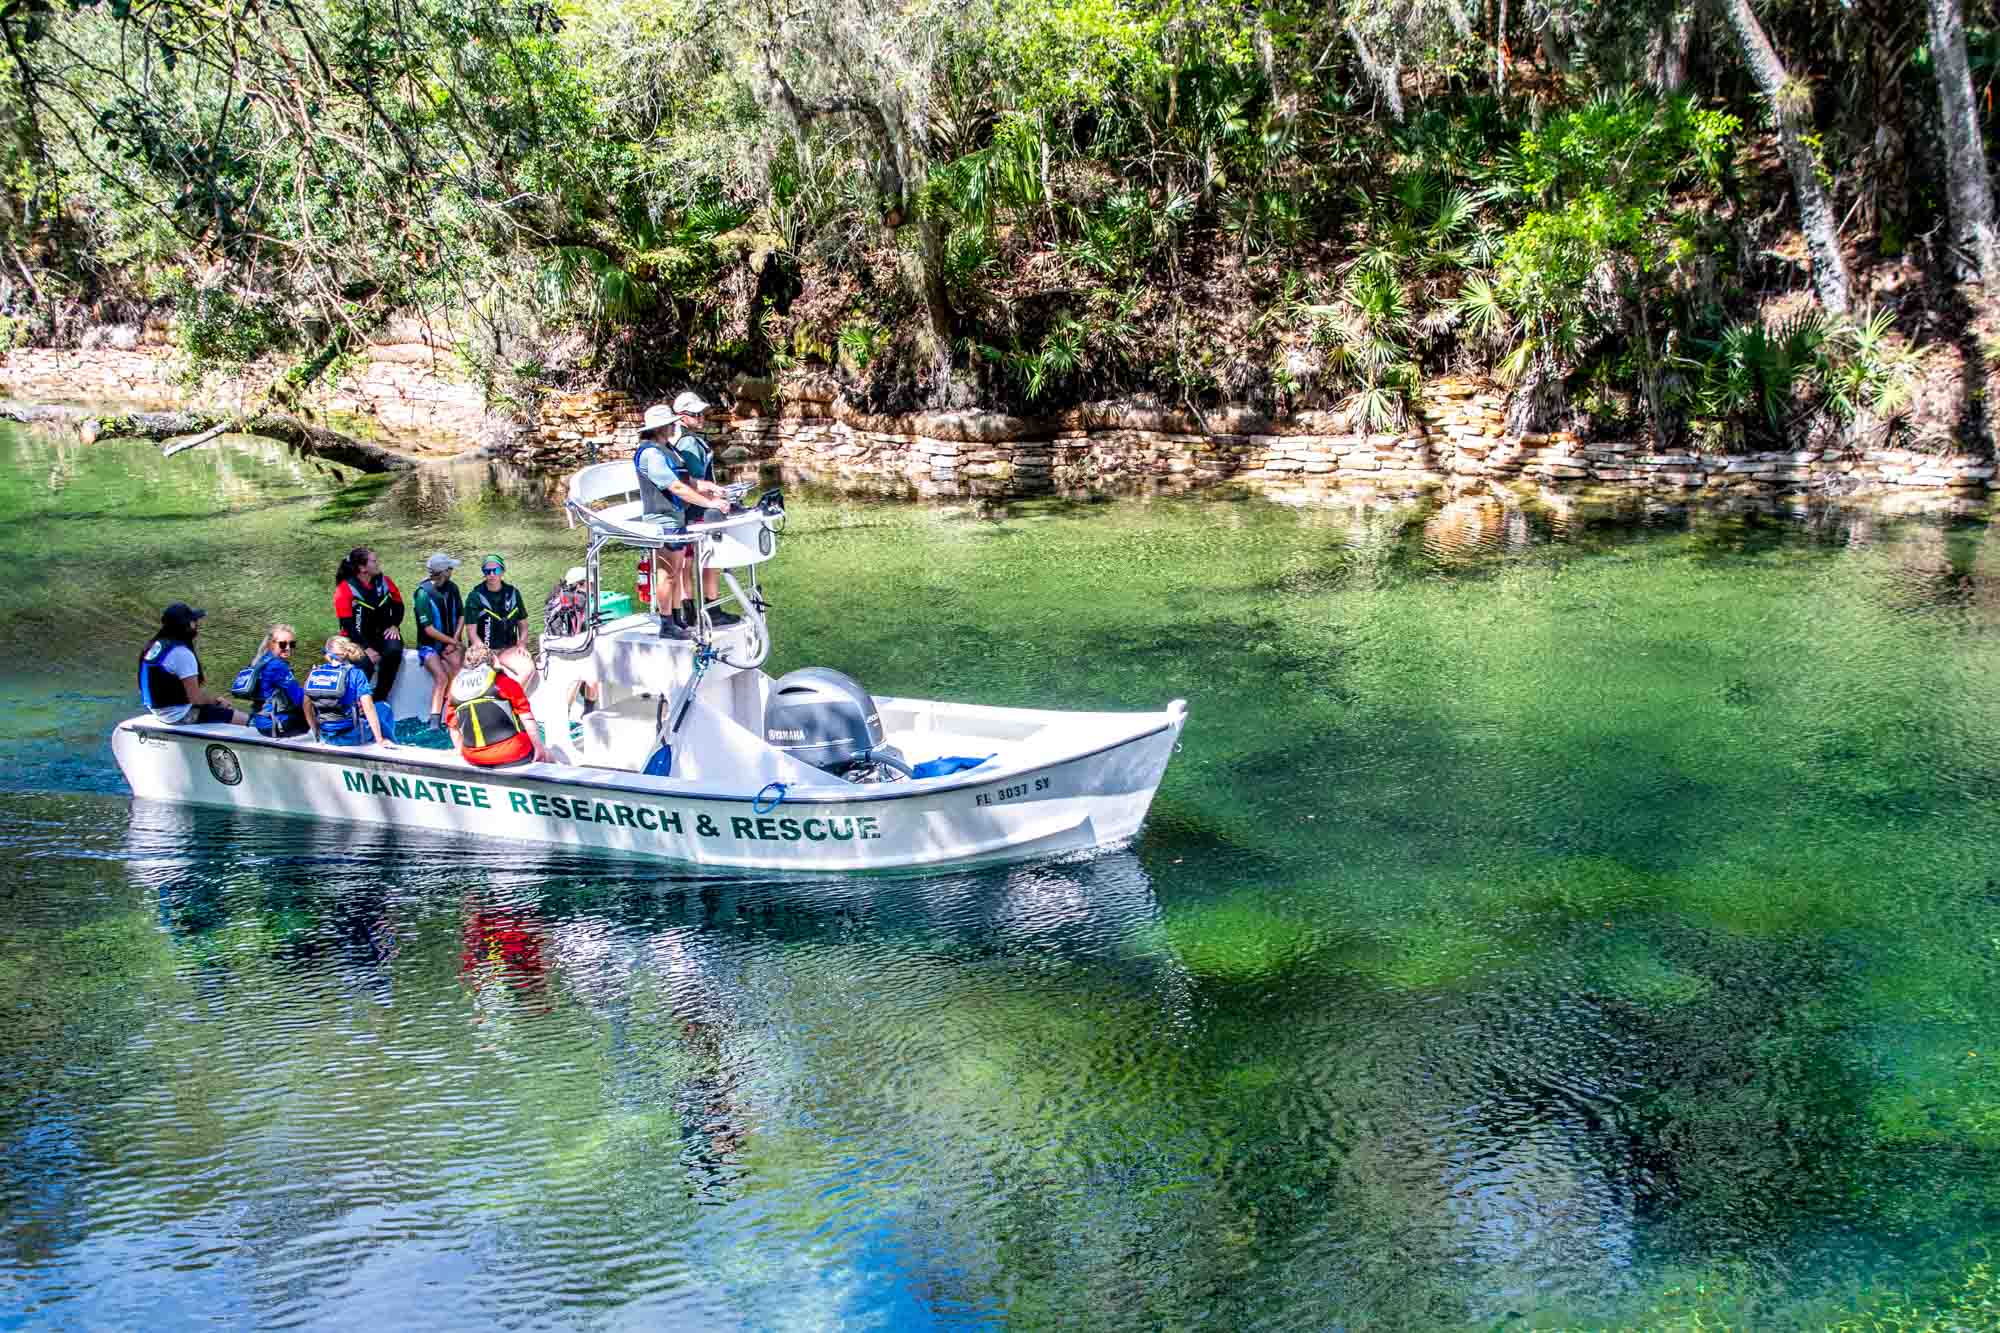 People in a boat labeled "Manatee Research & Rescue" sailing in a freshwater spring